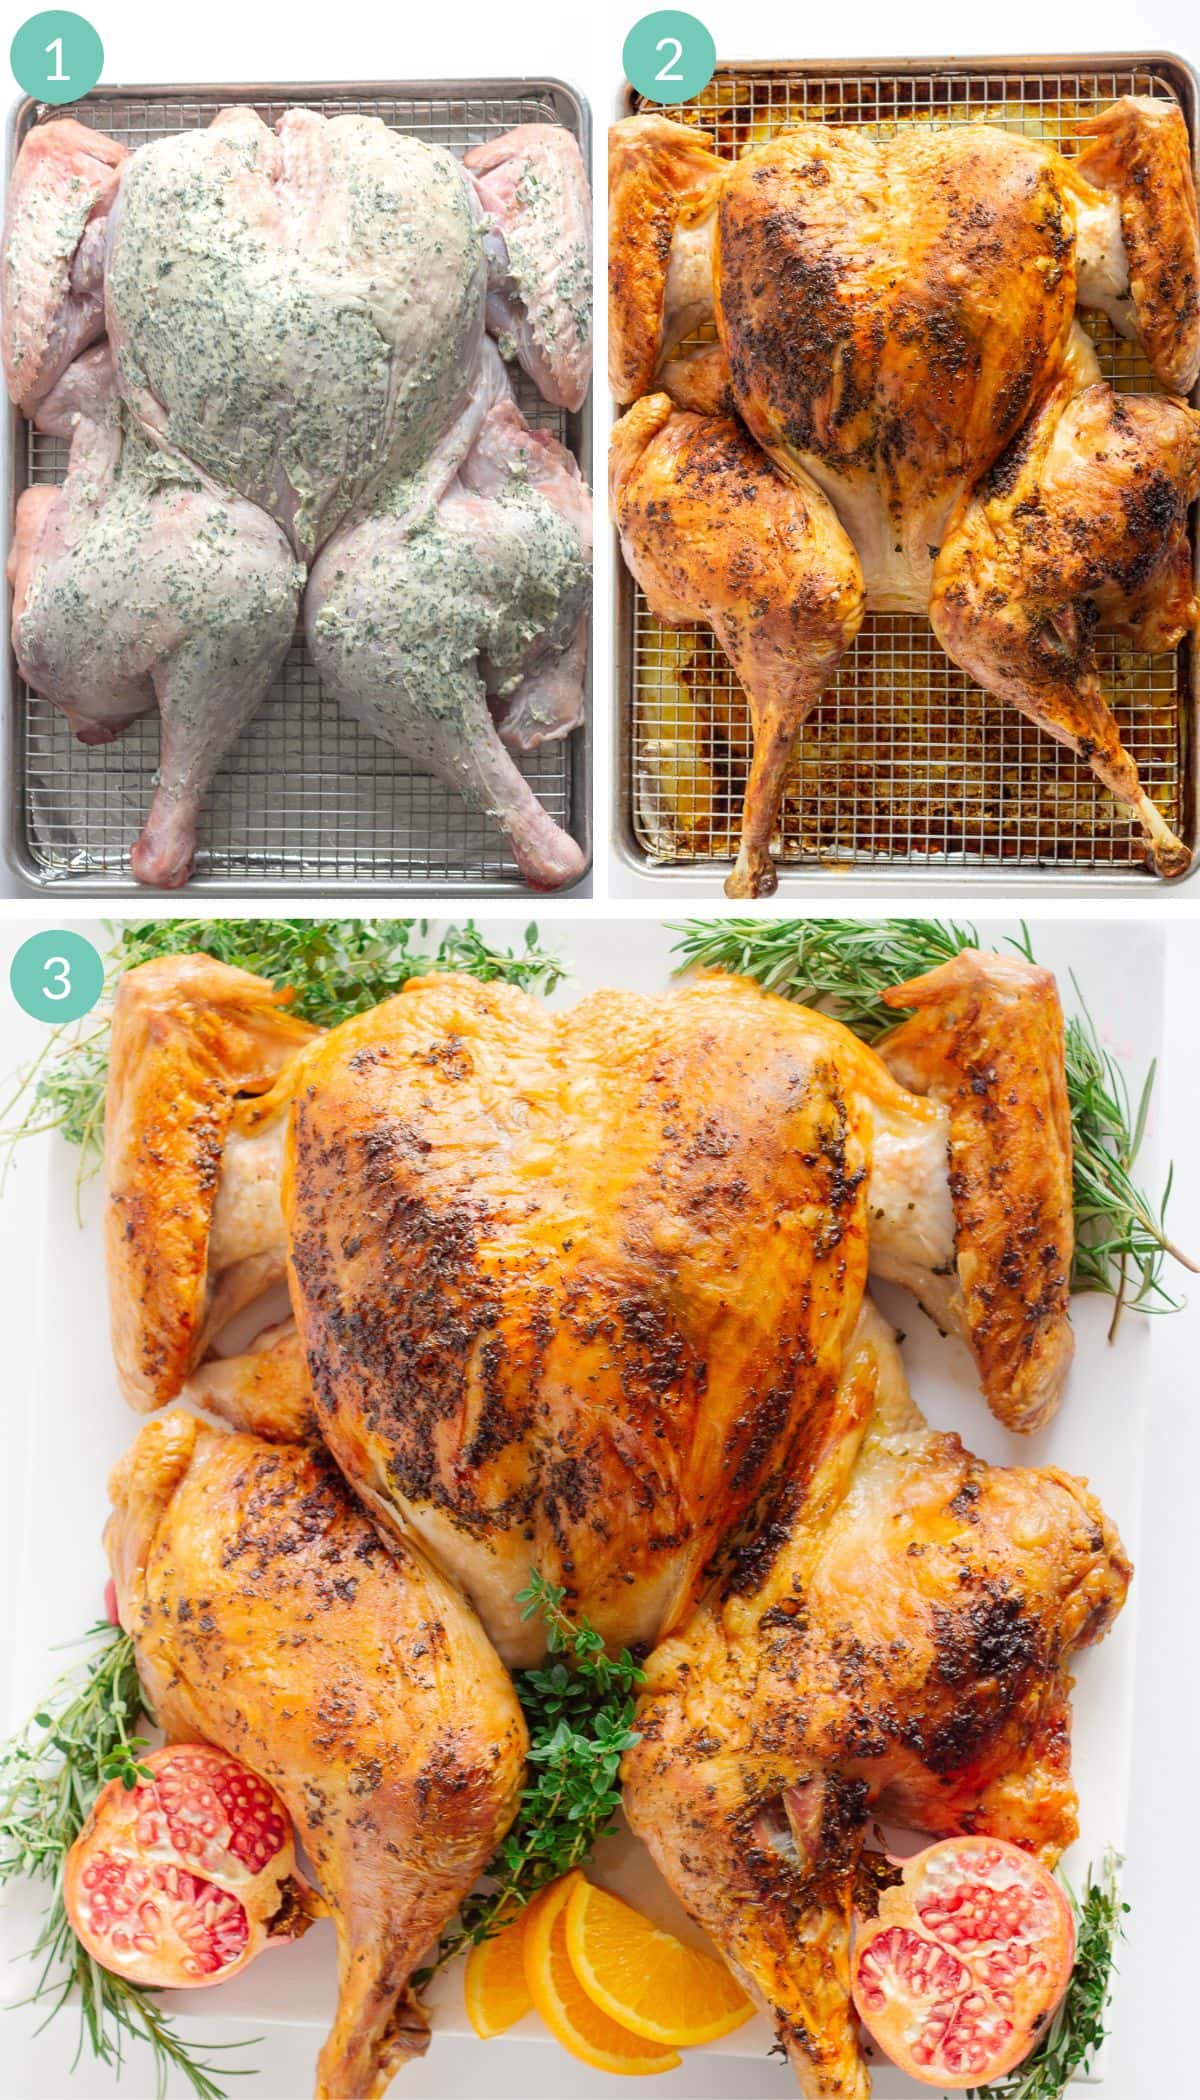 Numbered photo collage showing stages of a spatchcock turkey being roasted.